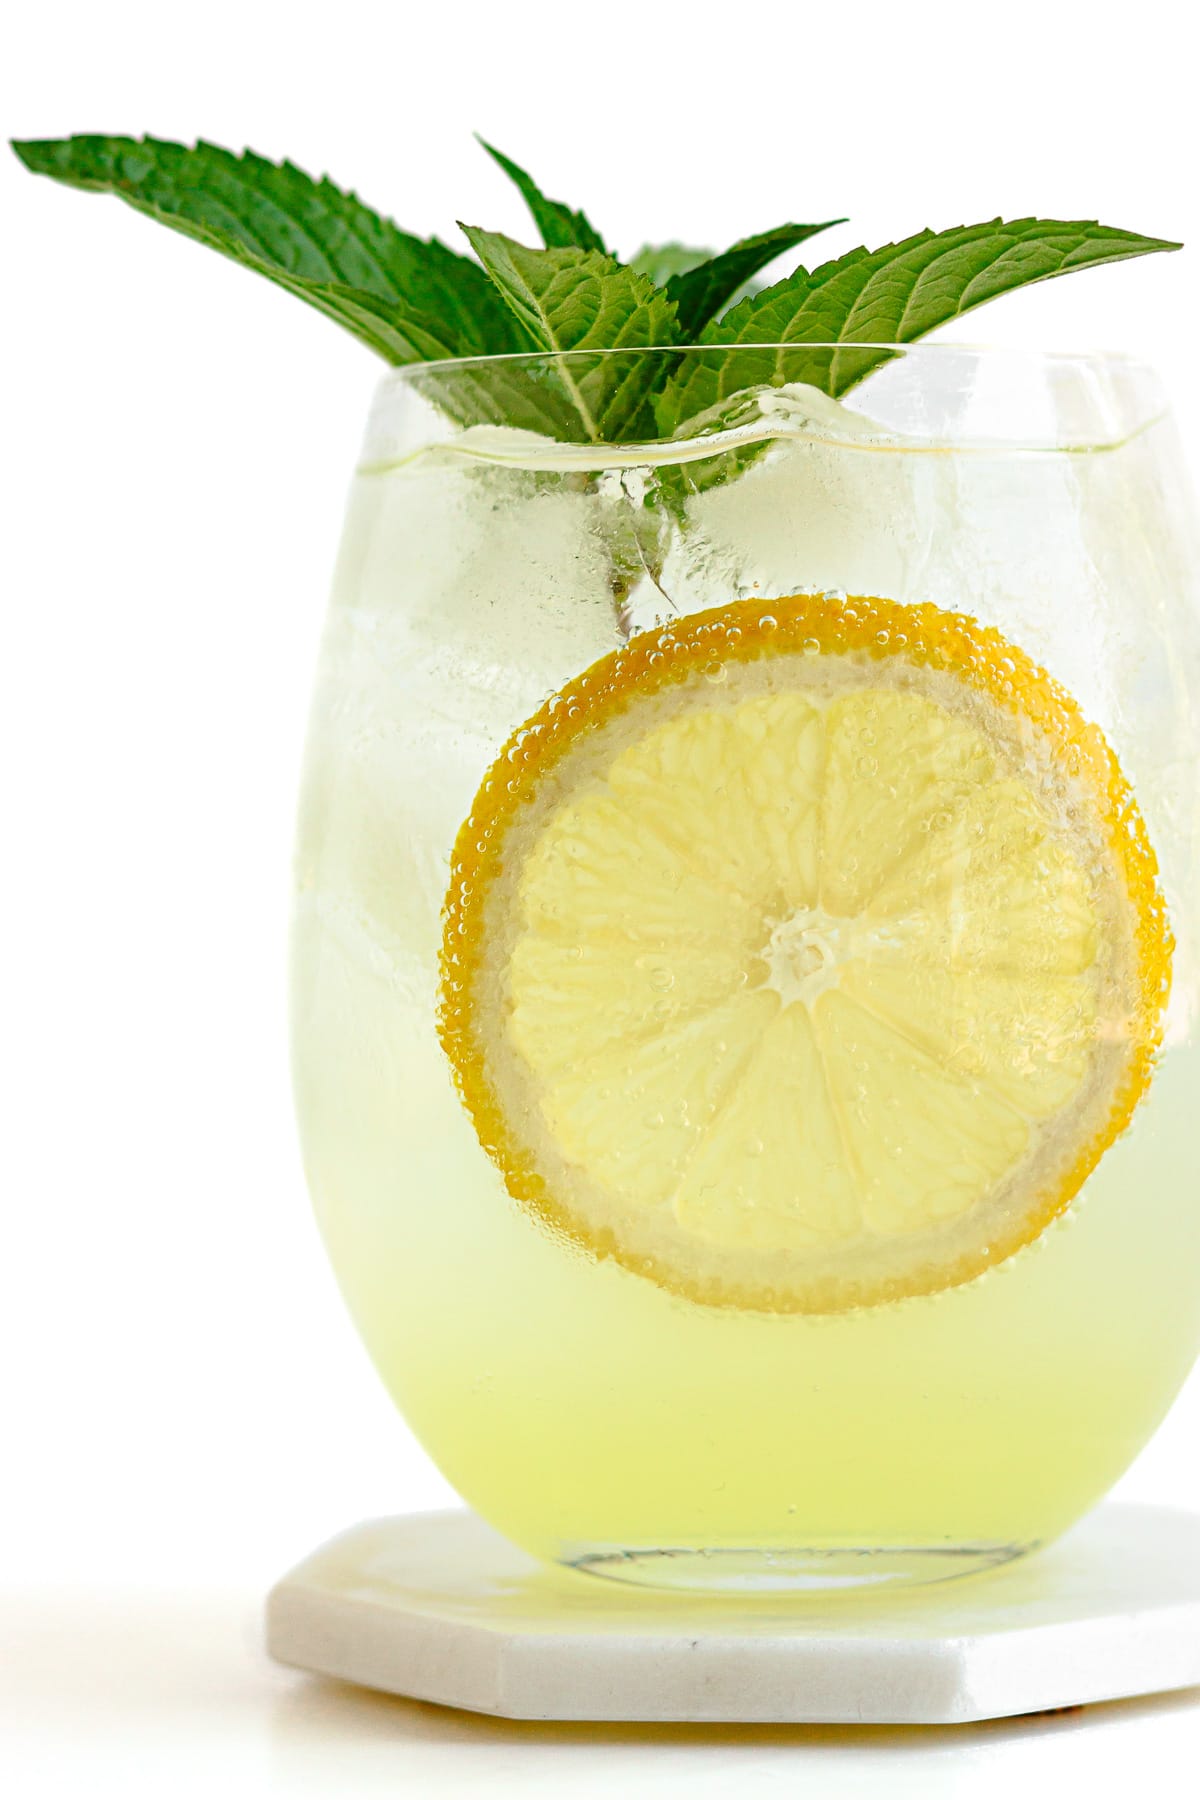 Closeup of a glass of limoncello spritz cocktail with a lemon slice and fresh mint.